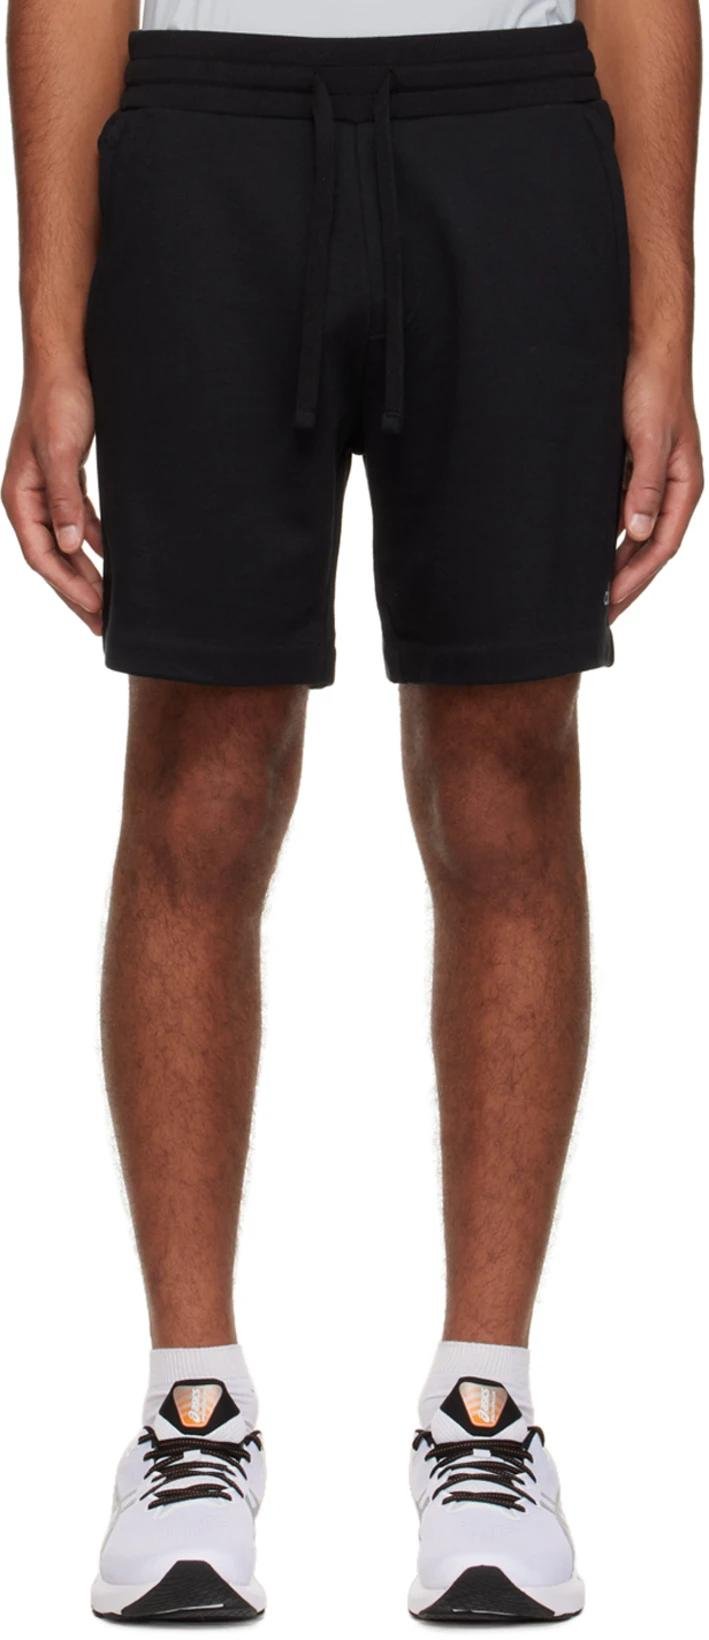 Black Chill Shorts by ALO